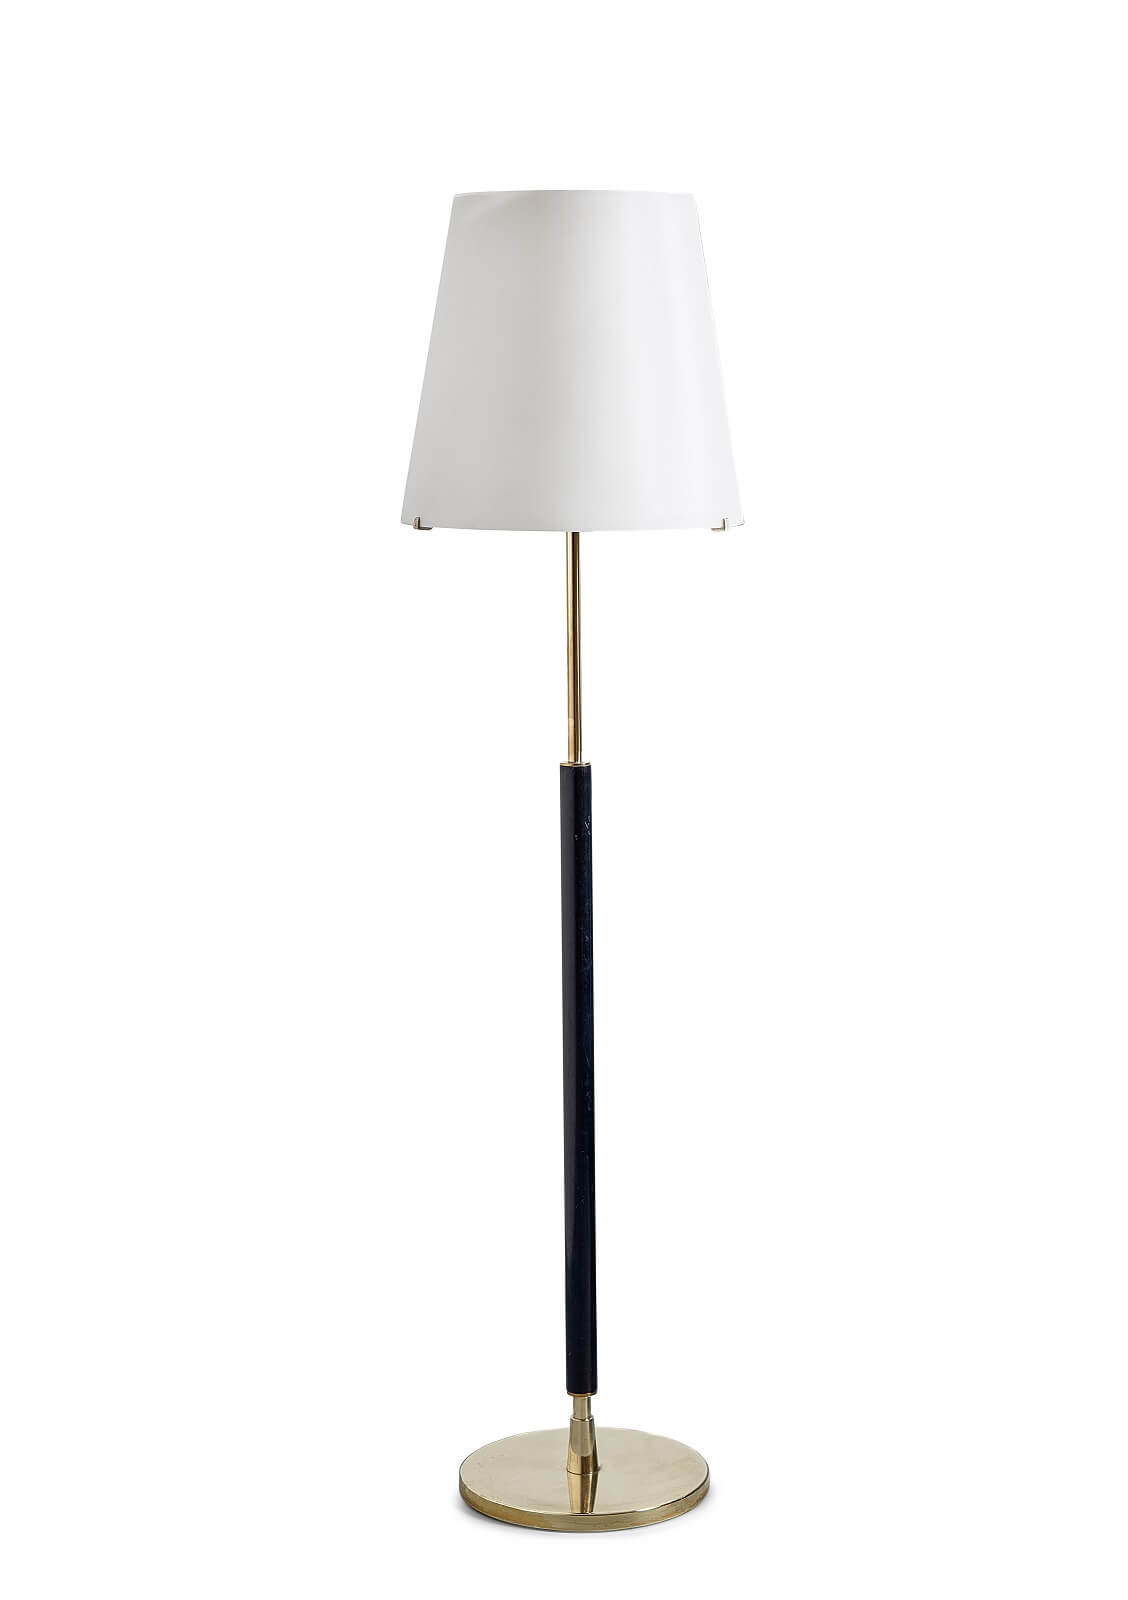 Floor lamp mod.2198 by Max Ingrand for sale